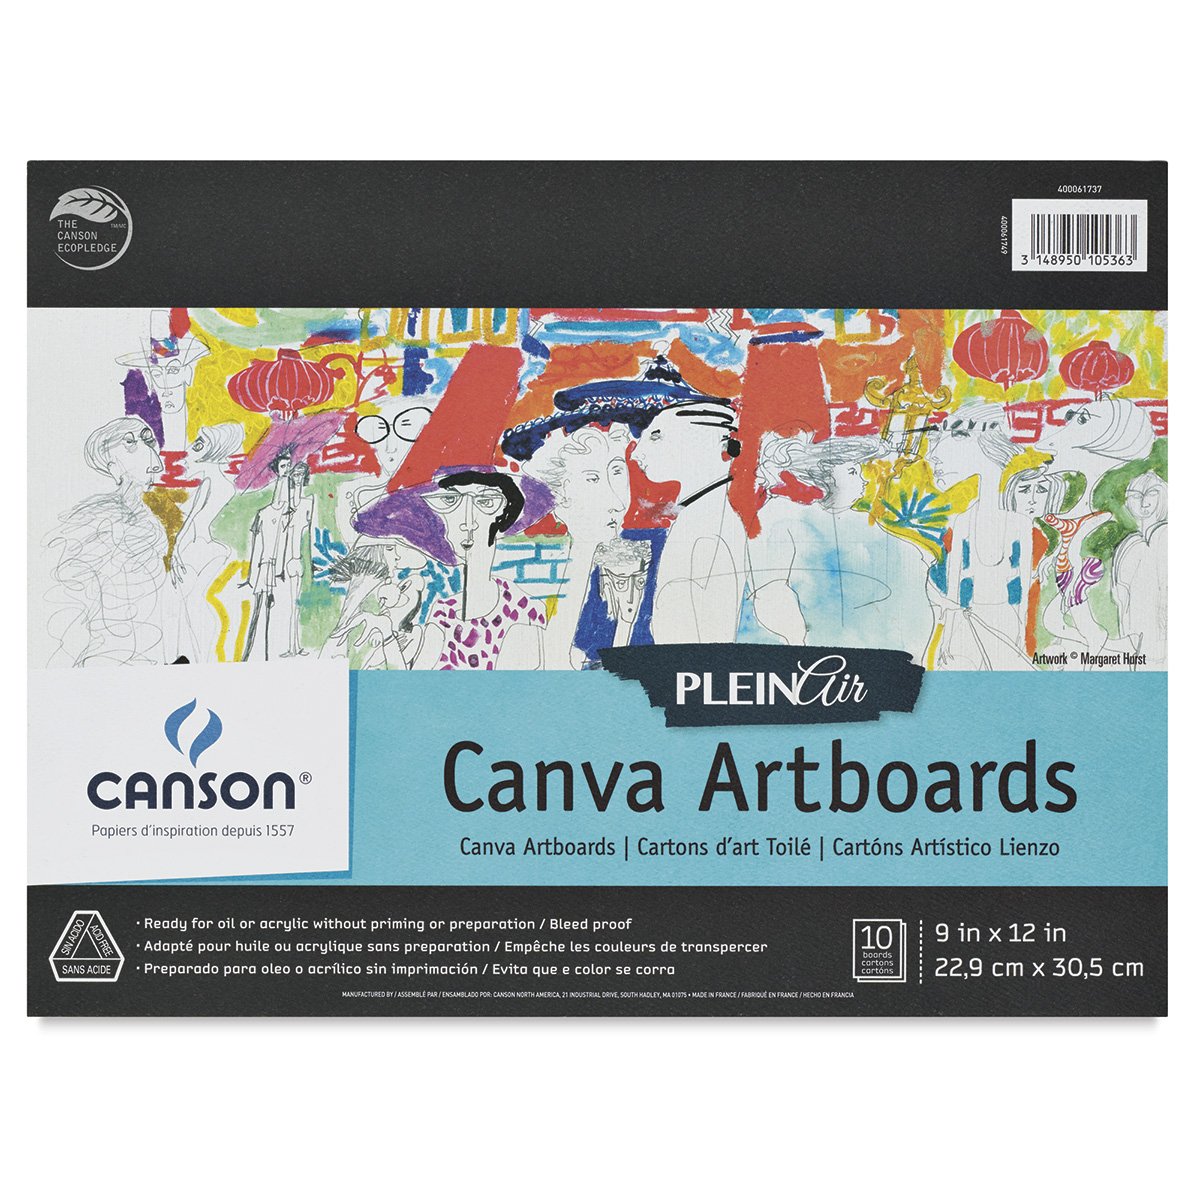 Best Illustration Boards for Drawings and Mixed-Media Works –